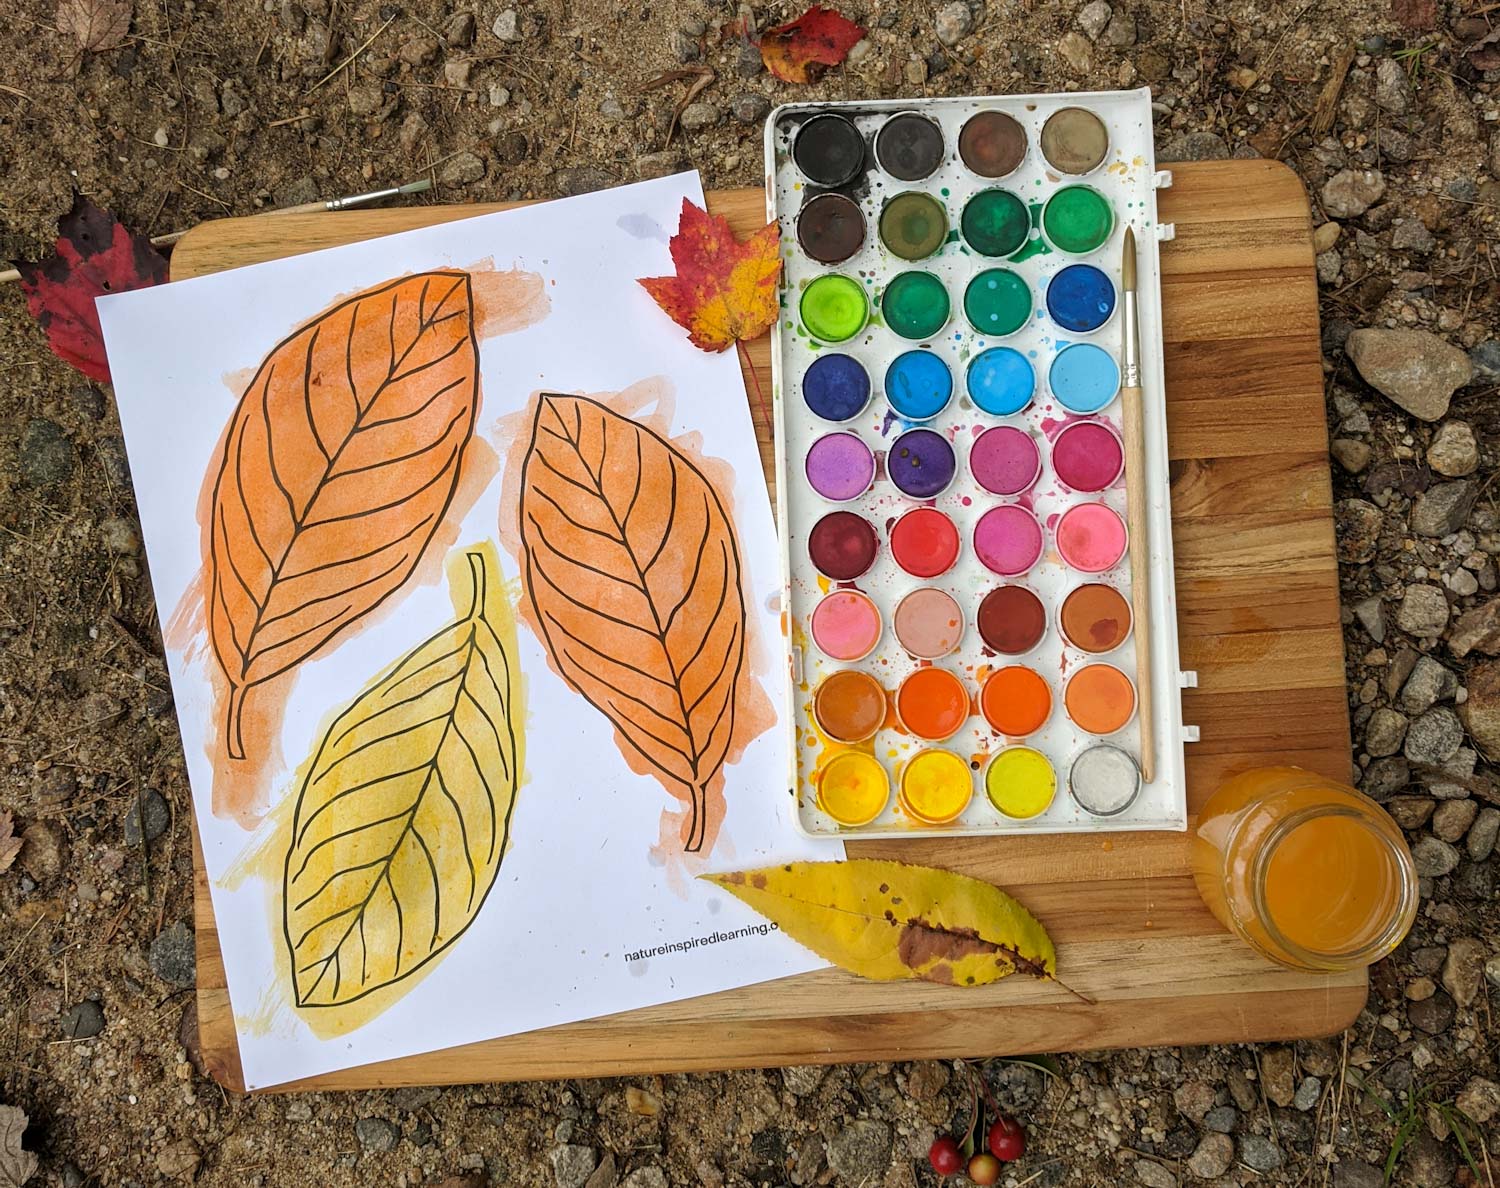 coloring sheet with three leaves painted using watercolor paint on a wooden board outside with water color paint set, water, paint brush on the rocky ground